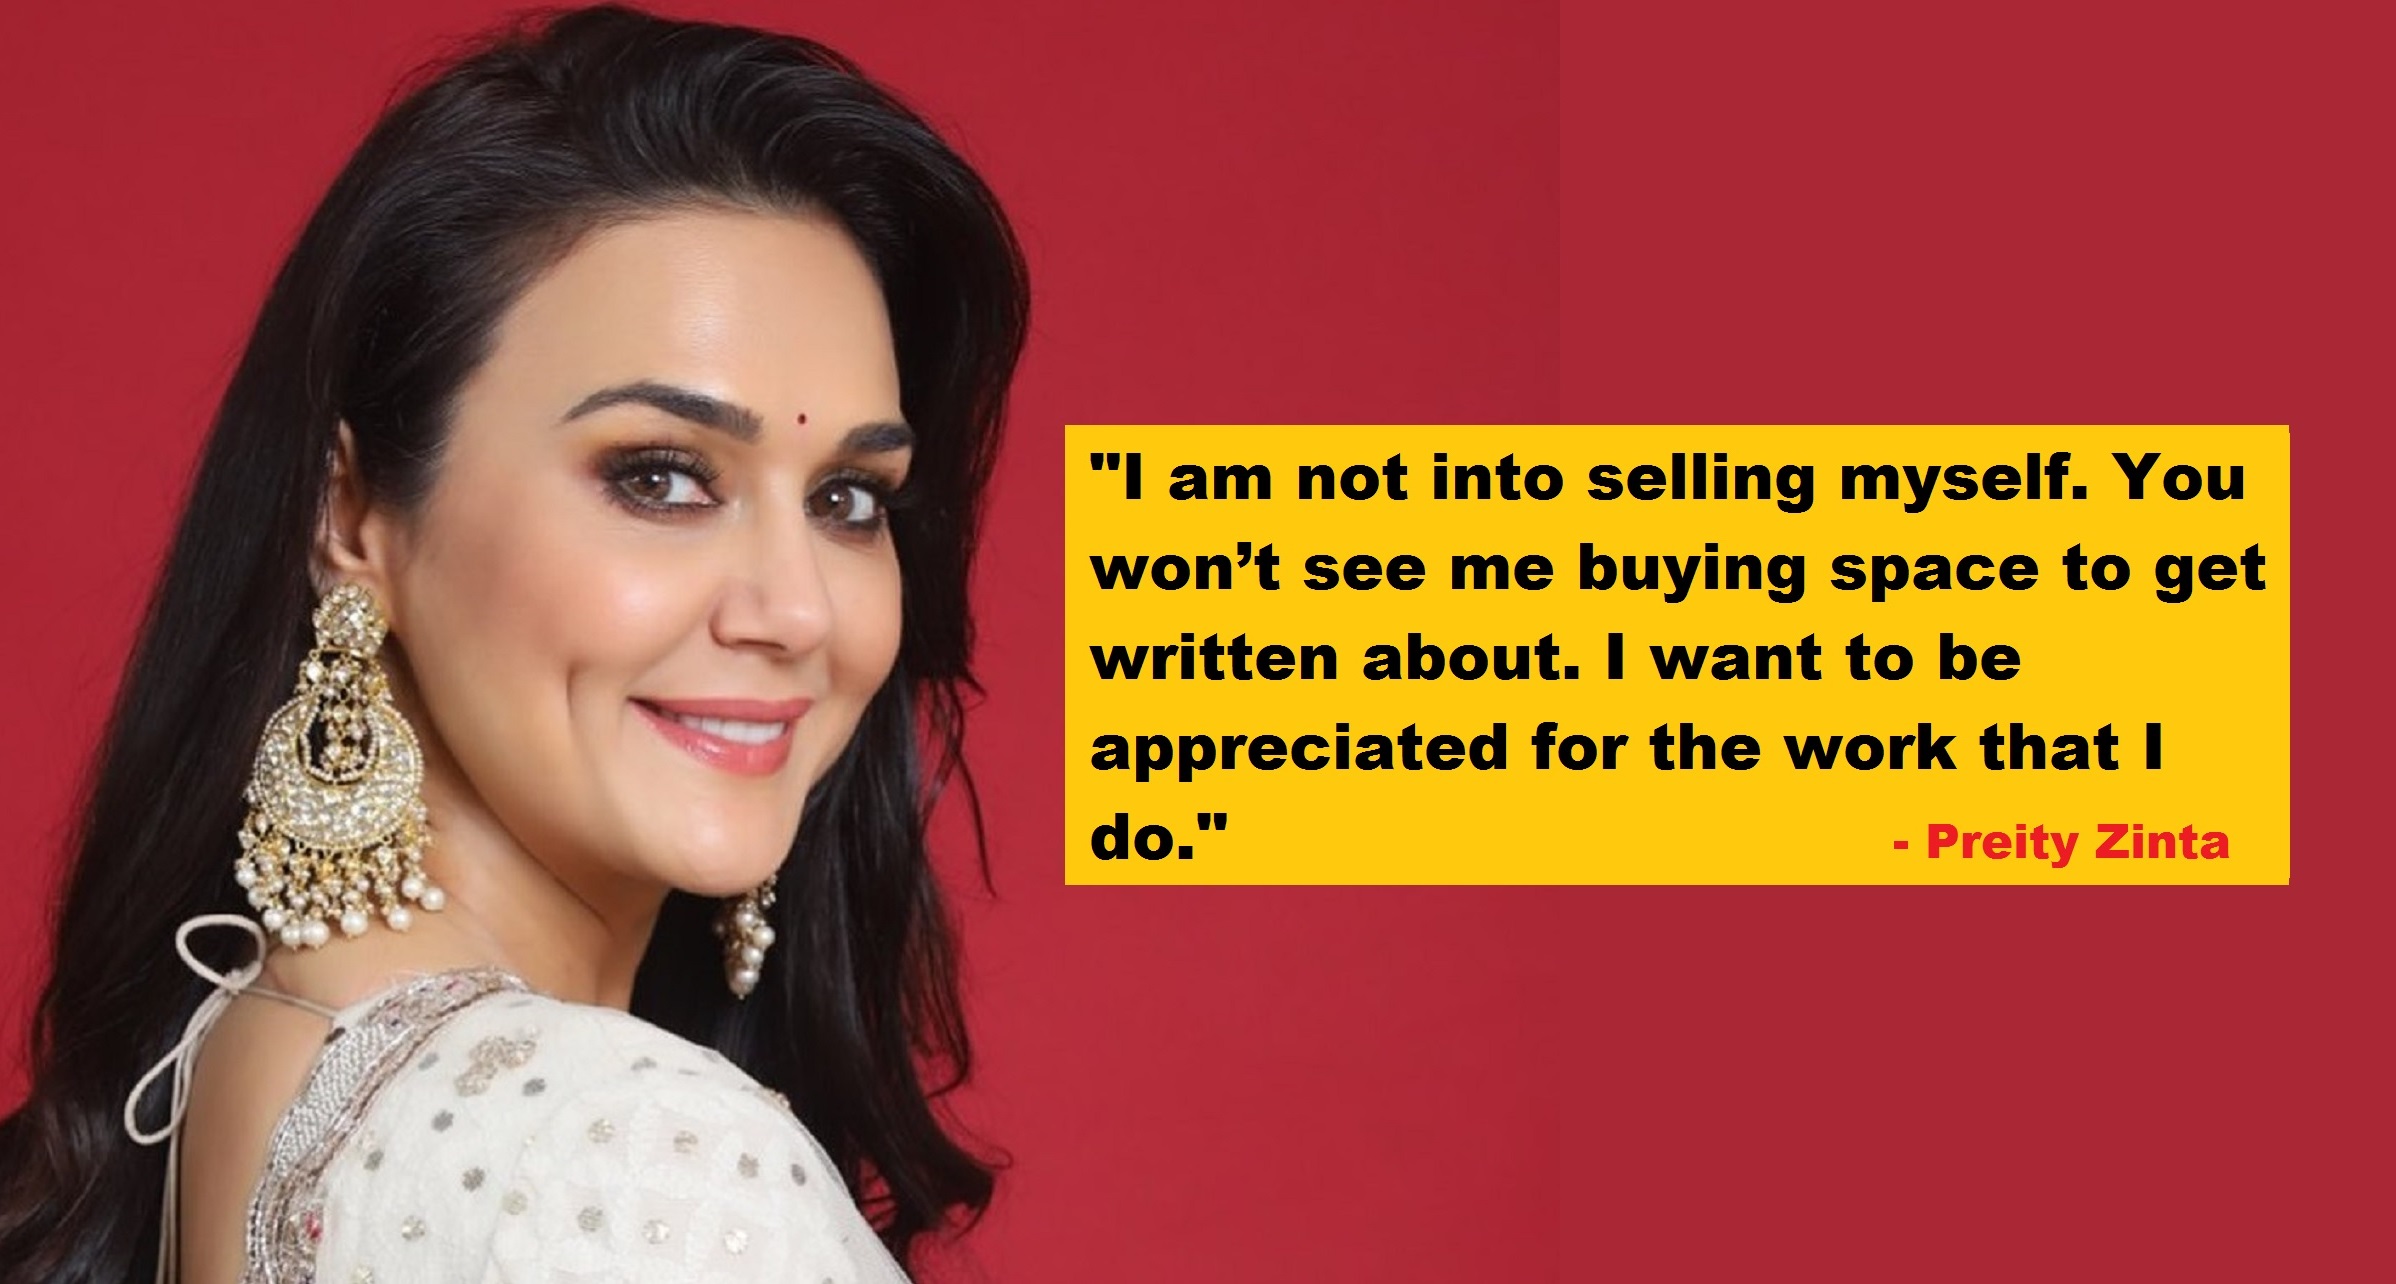 Preity Zinta Says She’s Not Seen in Bollywood Anymore as She ‘Cannot Sell Herself’